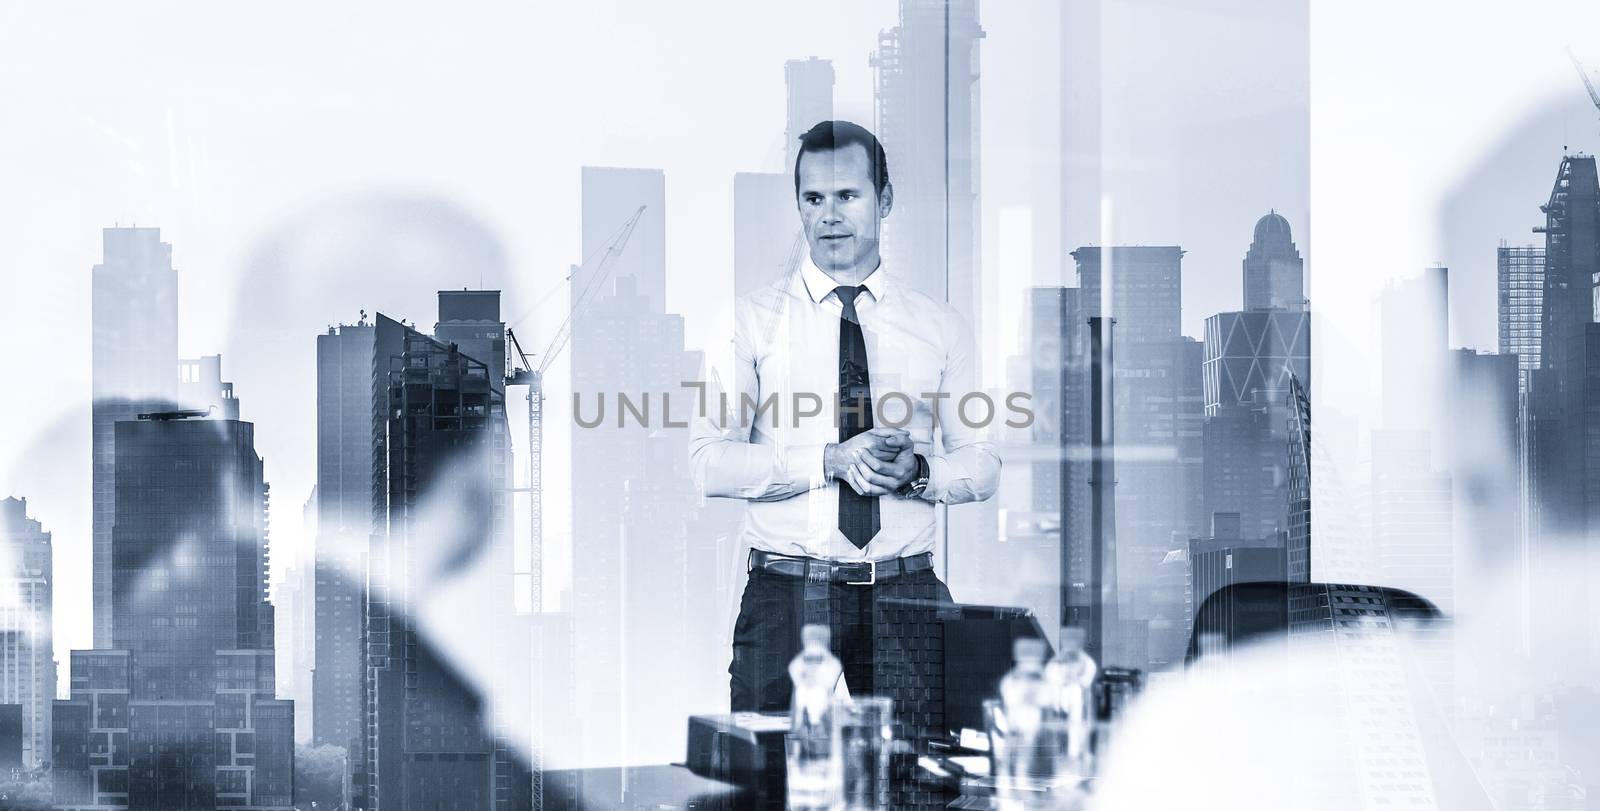 Corporate business, economic development or real estate company concept. Confident company leader on business meeting against new york city manhattan buildings and skyscrapers window reflections.